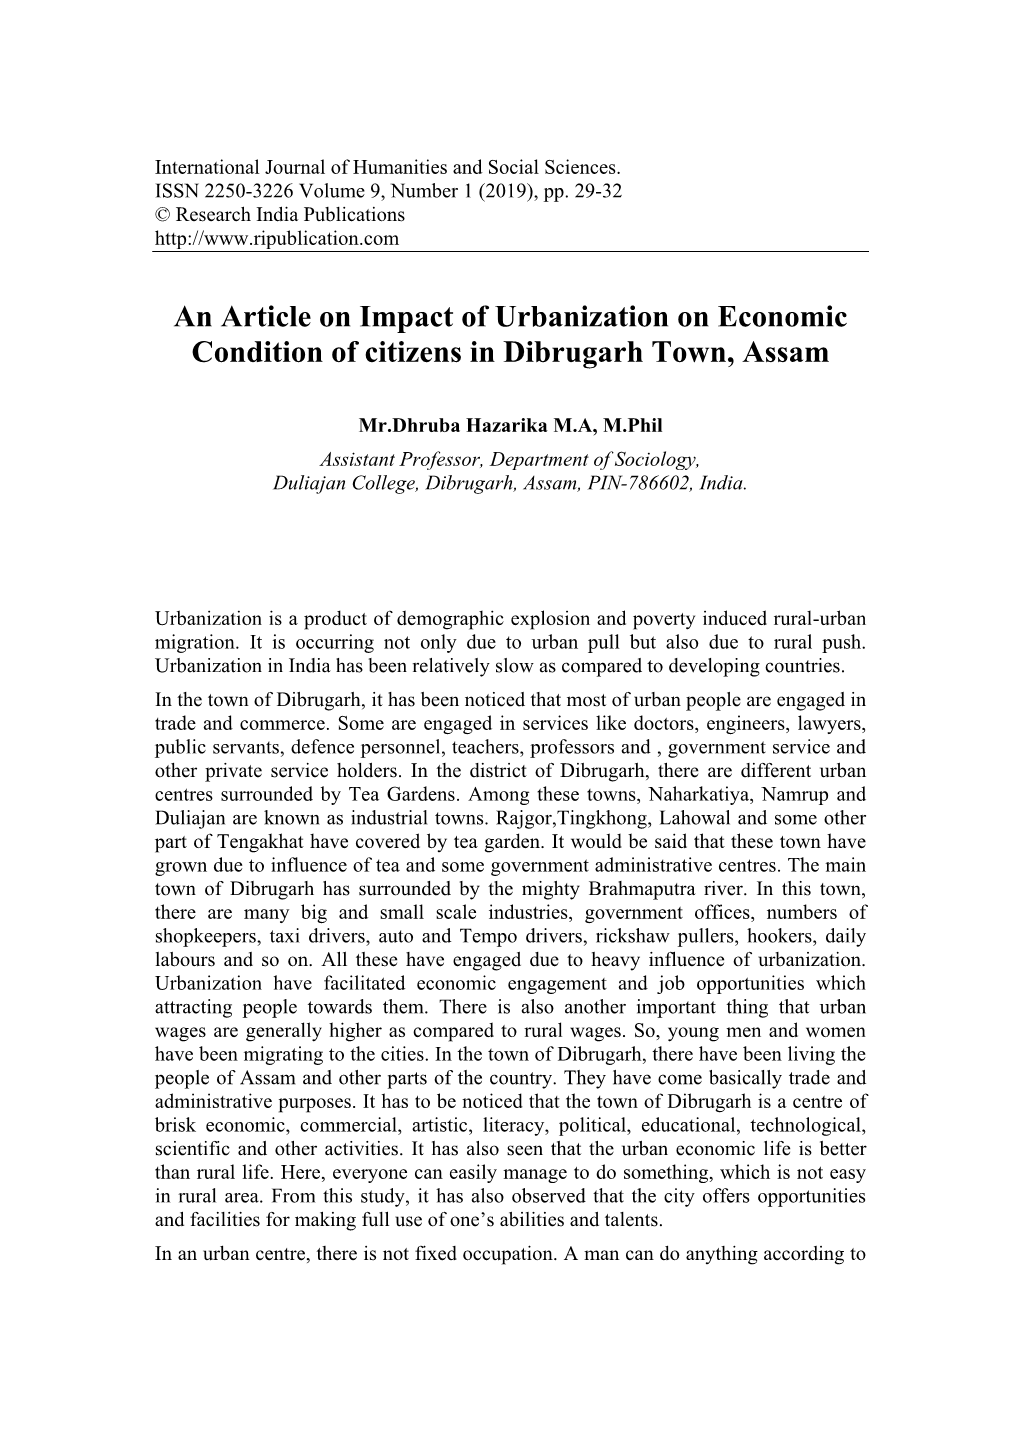 An Article on Impact of Urbanization on Economic Condition of Citizens in Dibrugarh Town, Assam